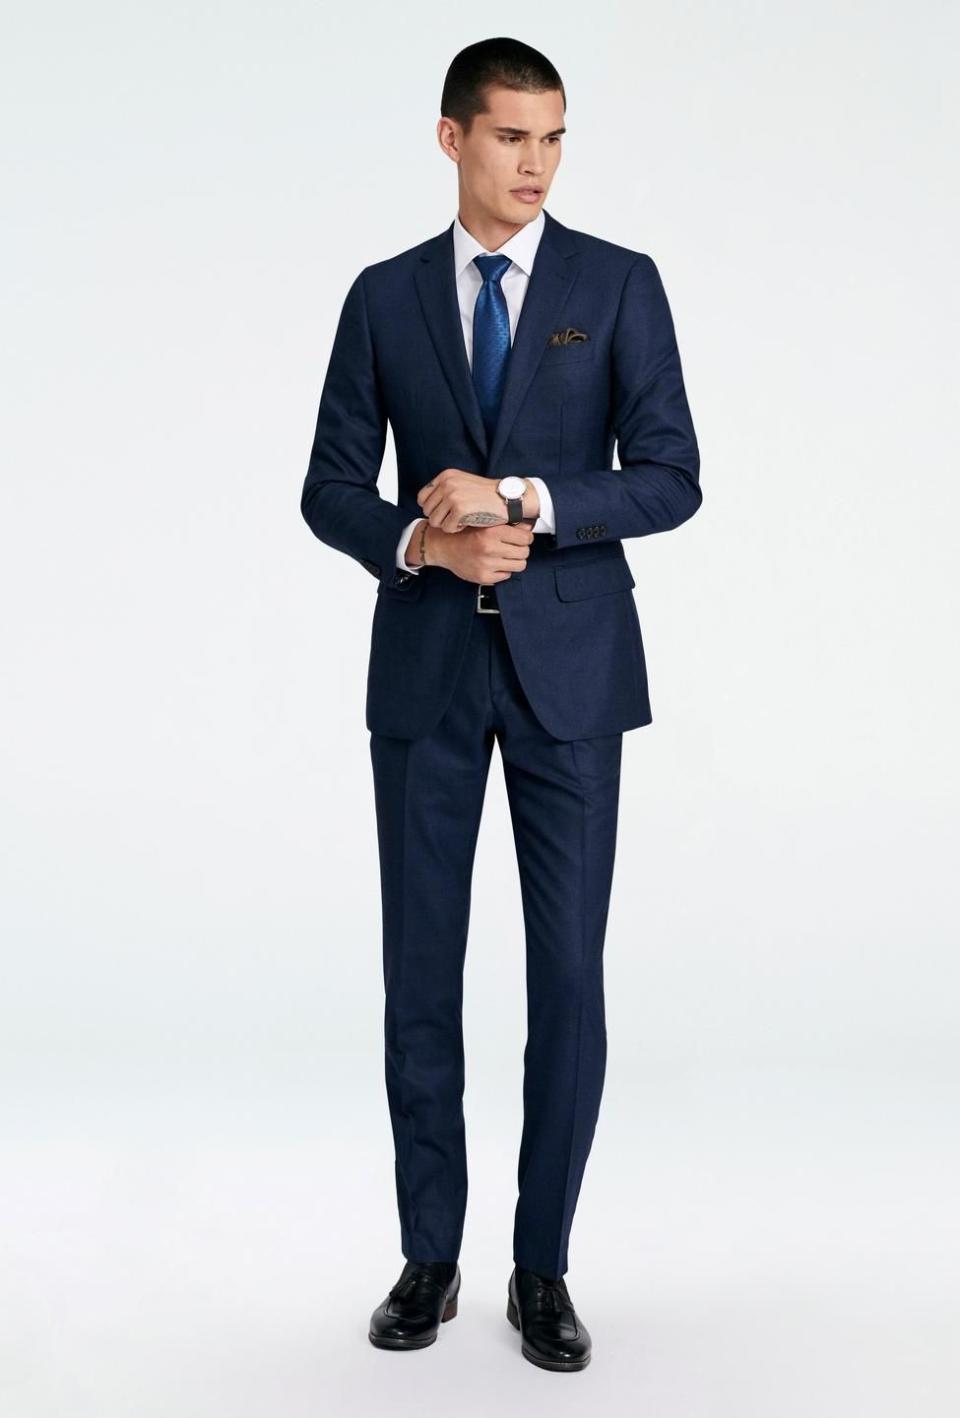 <p><strong>Indochino</strong></p><p>indochino.com</p><p><strong>$289.00</strong></p><p><a href="https://go.redirectingat.com?id=74968X1596630&url=https%3A%2F%2Fwww.indochino.com%2Fproduct%2Fbottsford-micro-check-navy-blazer&sref=https%3A%2F%2Fwww.menshealth.com%2Fstyle%2Fg39453380%2Fbest-blazers-for-men%2F" rel="nofollow noopener" target="_blank" data-ylk="slk:Shop Now" class="link ">Shop Now</a></p><p>For guys who prefer more formal styles, you can't go wrong with this sleek wool blazer from Indochino. Yes, it's on the conservative side, but this micro check pattern makes for an interesting twist. Plus, each order from Indochino is custom made for a perfect fit. </p>